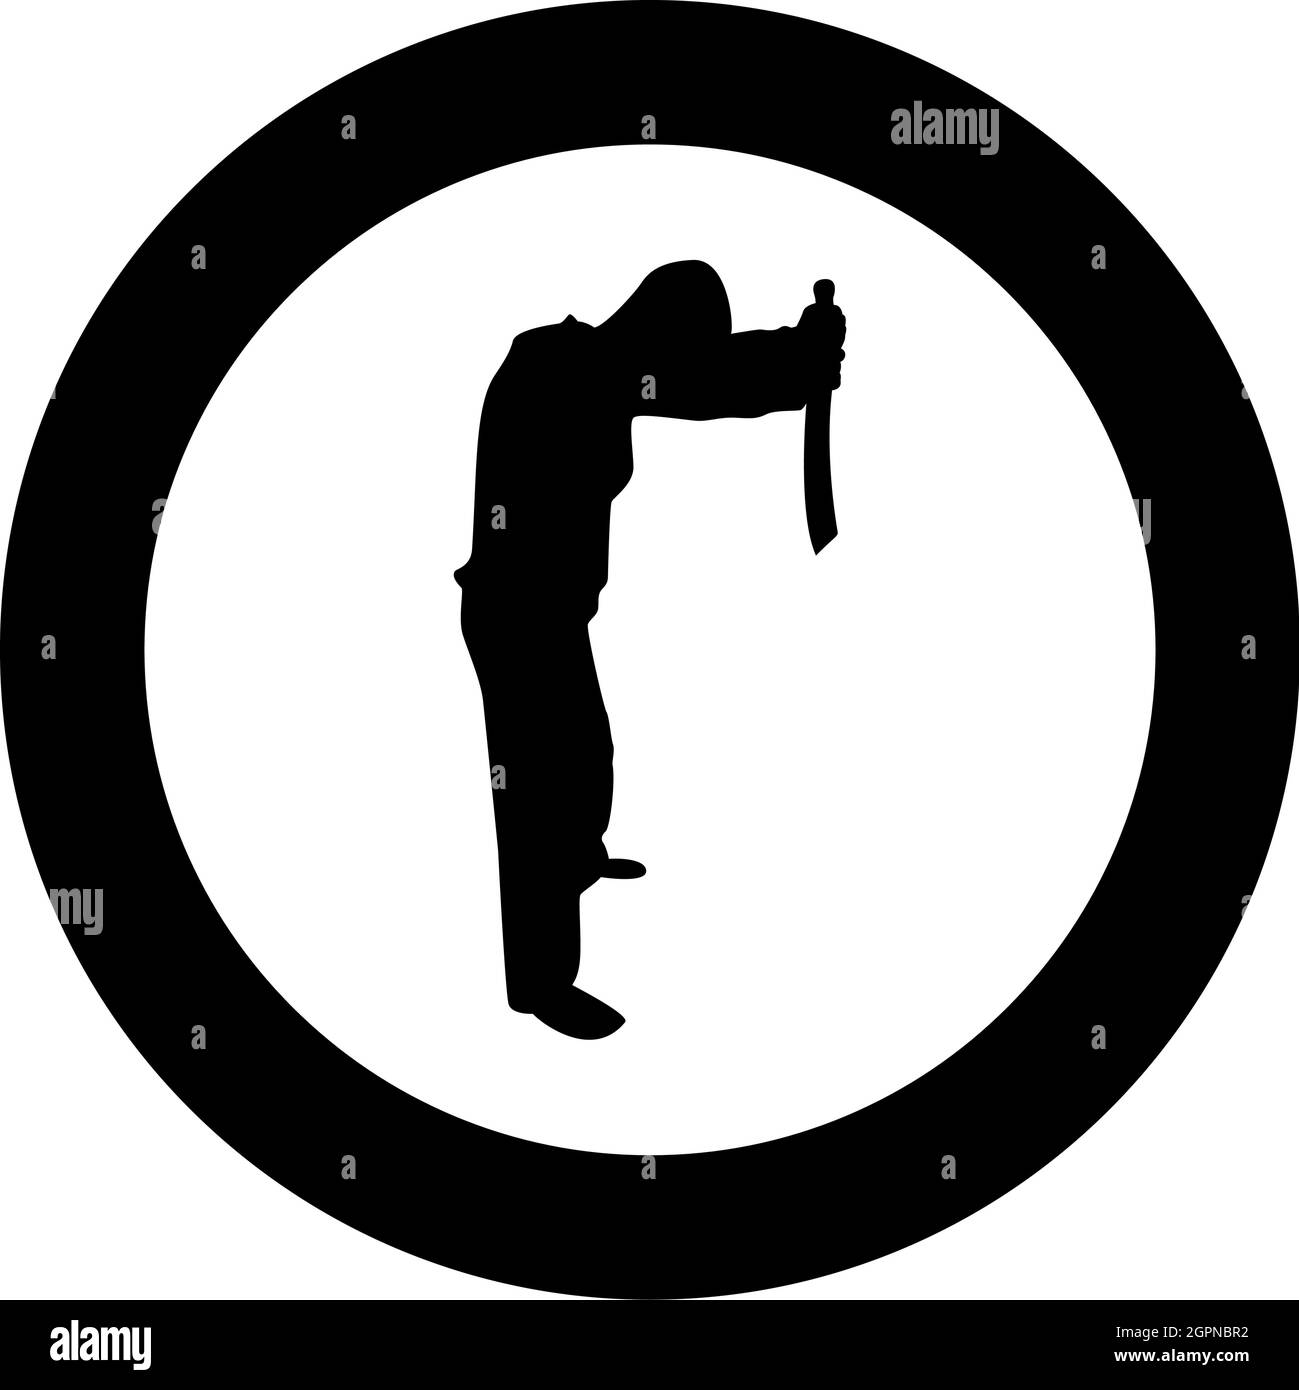 Man with sword machete from above Cold weapons in hand military man Soldier Serviceman in positions Hunter with knife Fight poses Strong defender Warrior concept Weaponry Stand silhouette in circle round black color vector illustration solid outline style Stock Vector